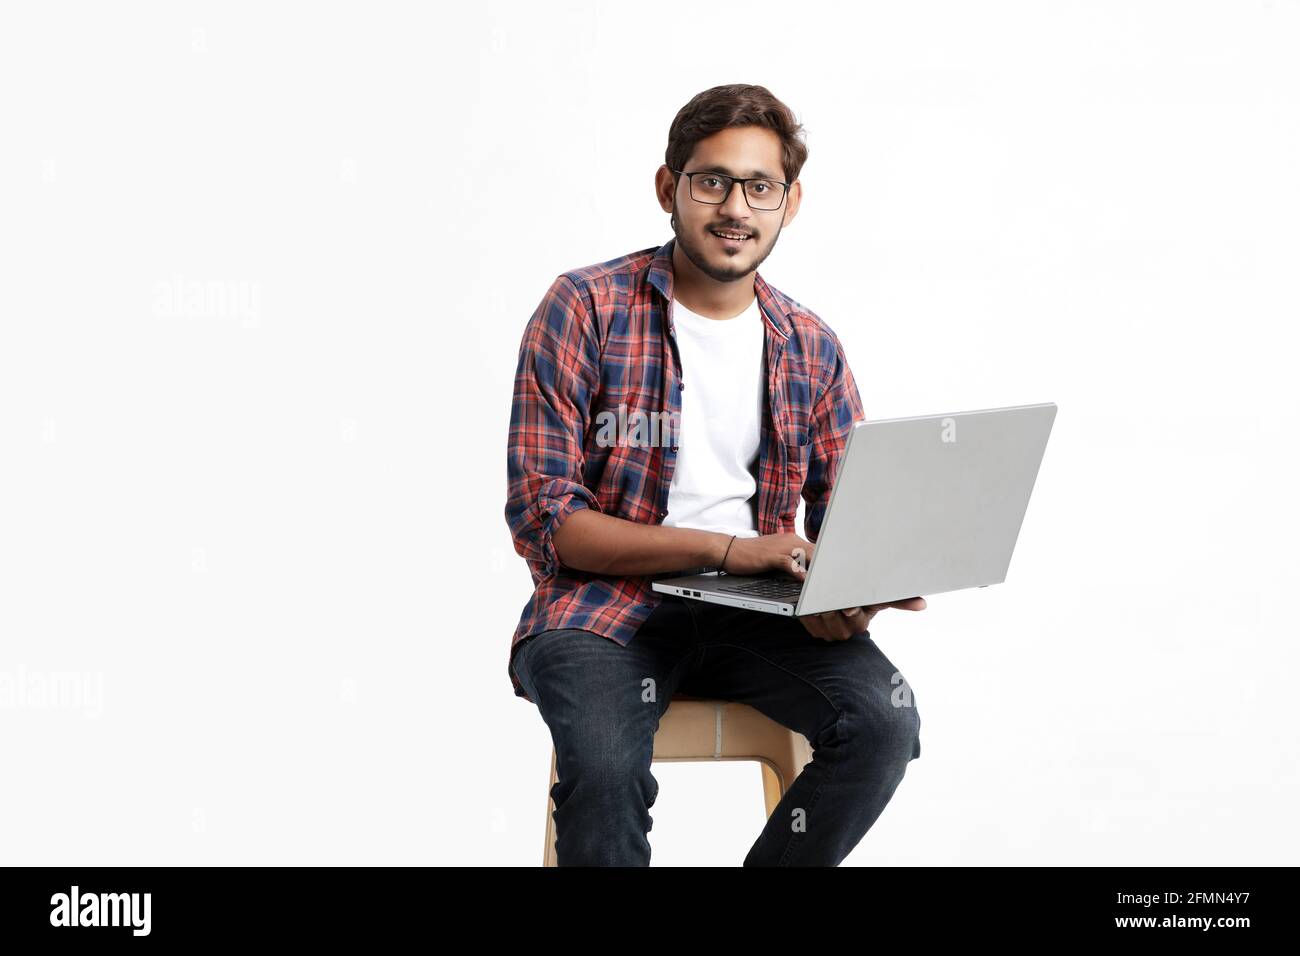 Indian college student using laptop on white background. Stock Photo